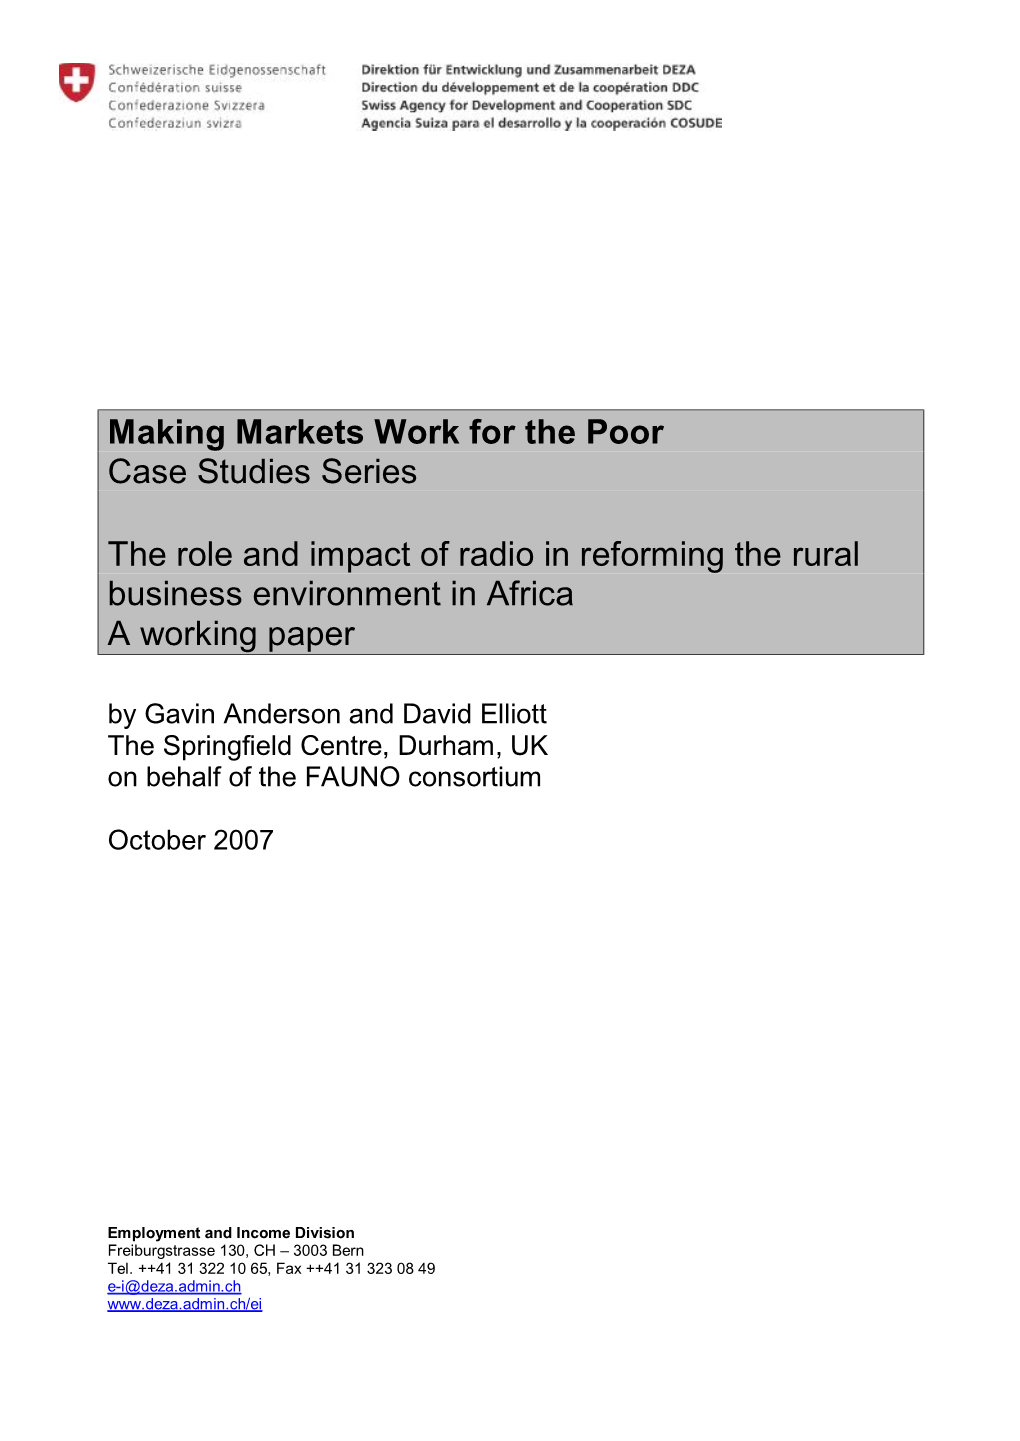 The Role and Impact of Radio in Reforming the Rural Business Environment in Africa a Working Paper